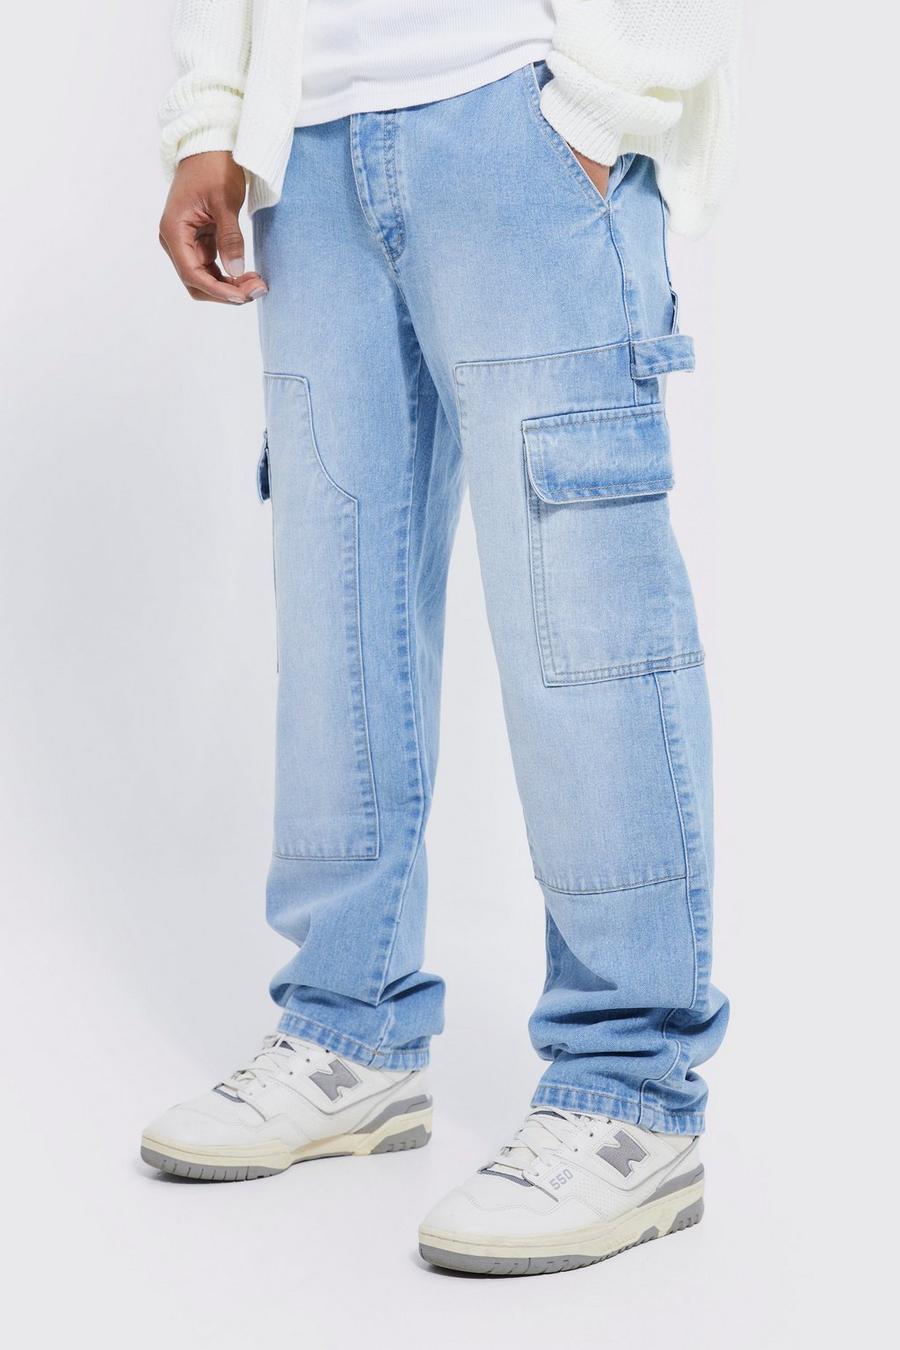 Mens Cargo Jeans Combat Trousers Heavy Duty Work Casual Big Tall Denim Pants